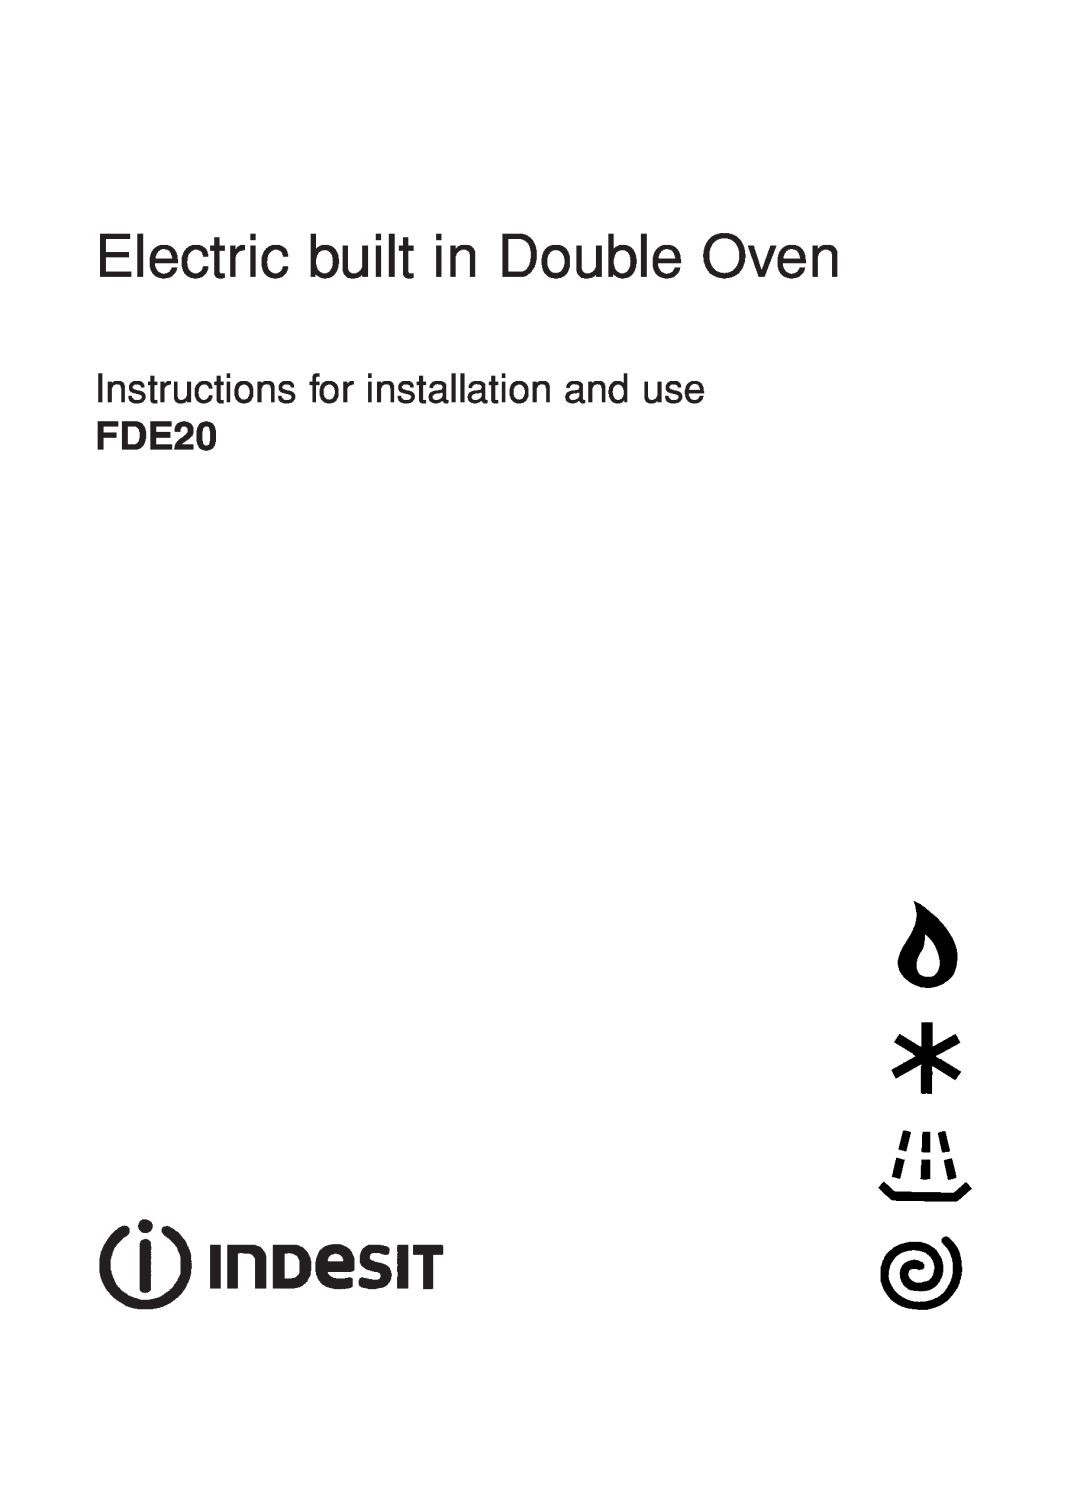 Indesit FDE20 manual Electric built in Double Oven, Instructions for installation and use 